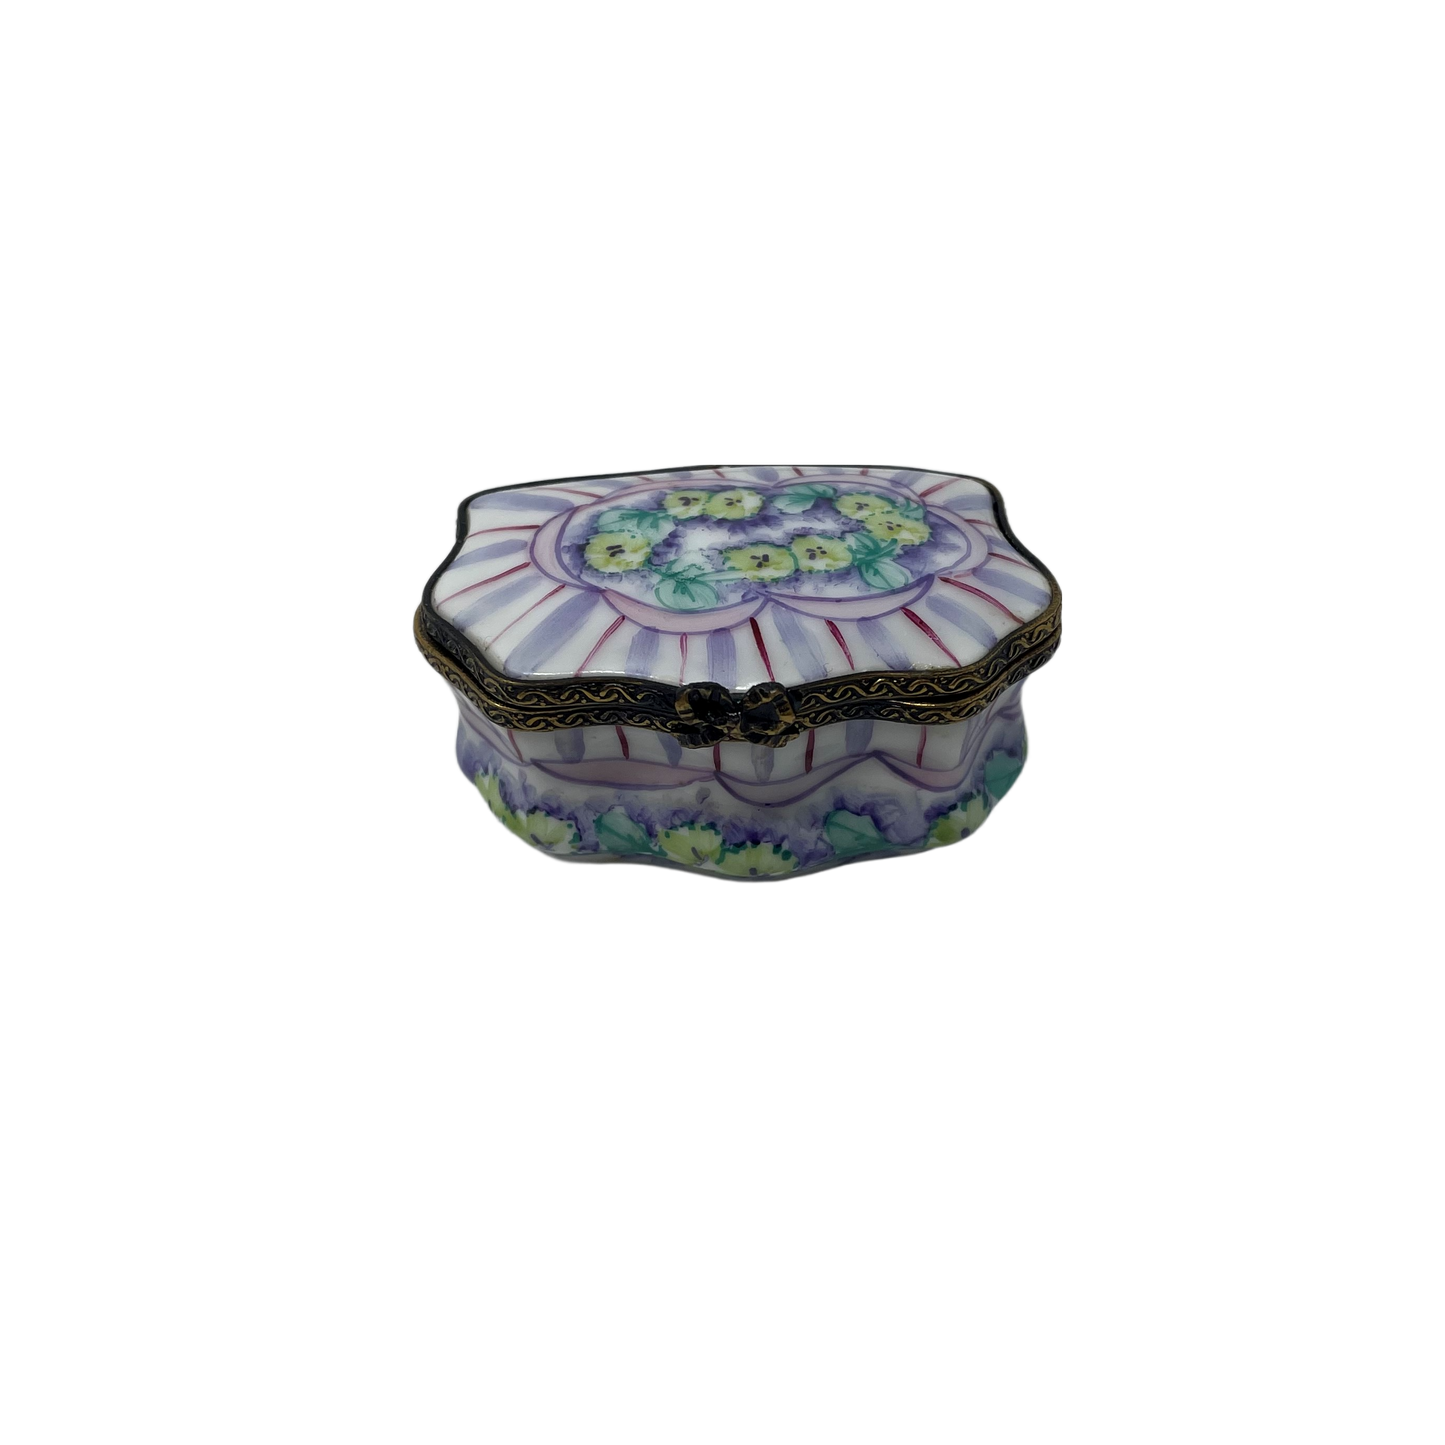 Enchanting Blooms: Limoges Box in the Shape of a Pastel Purple and Green Floral Box